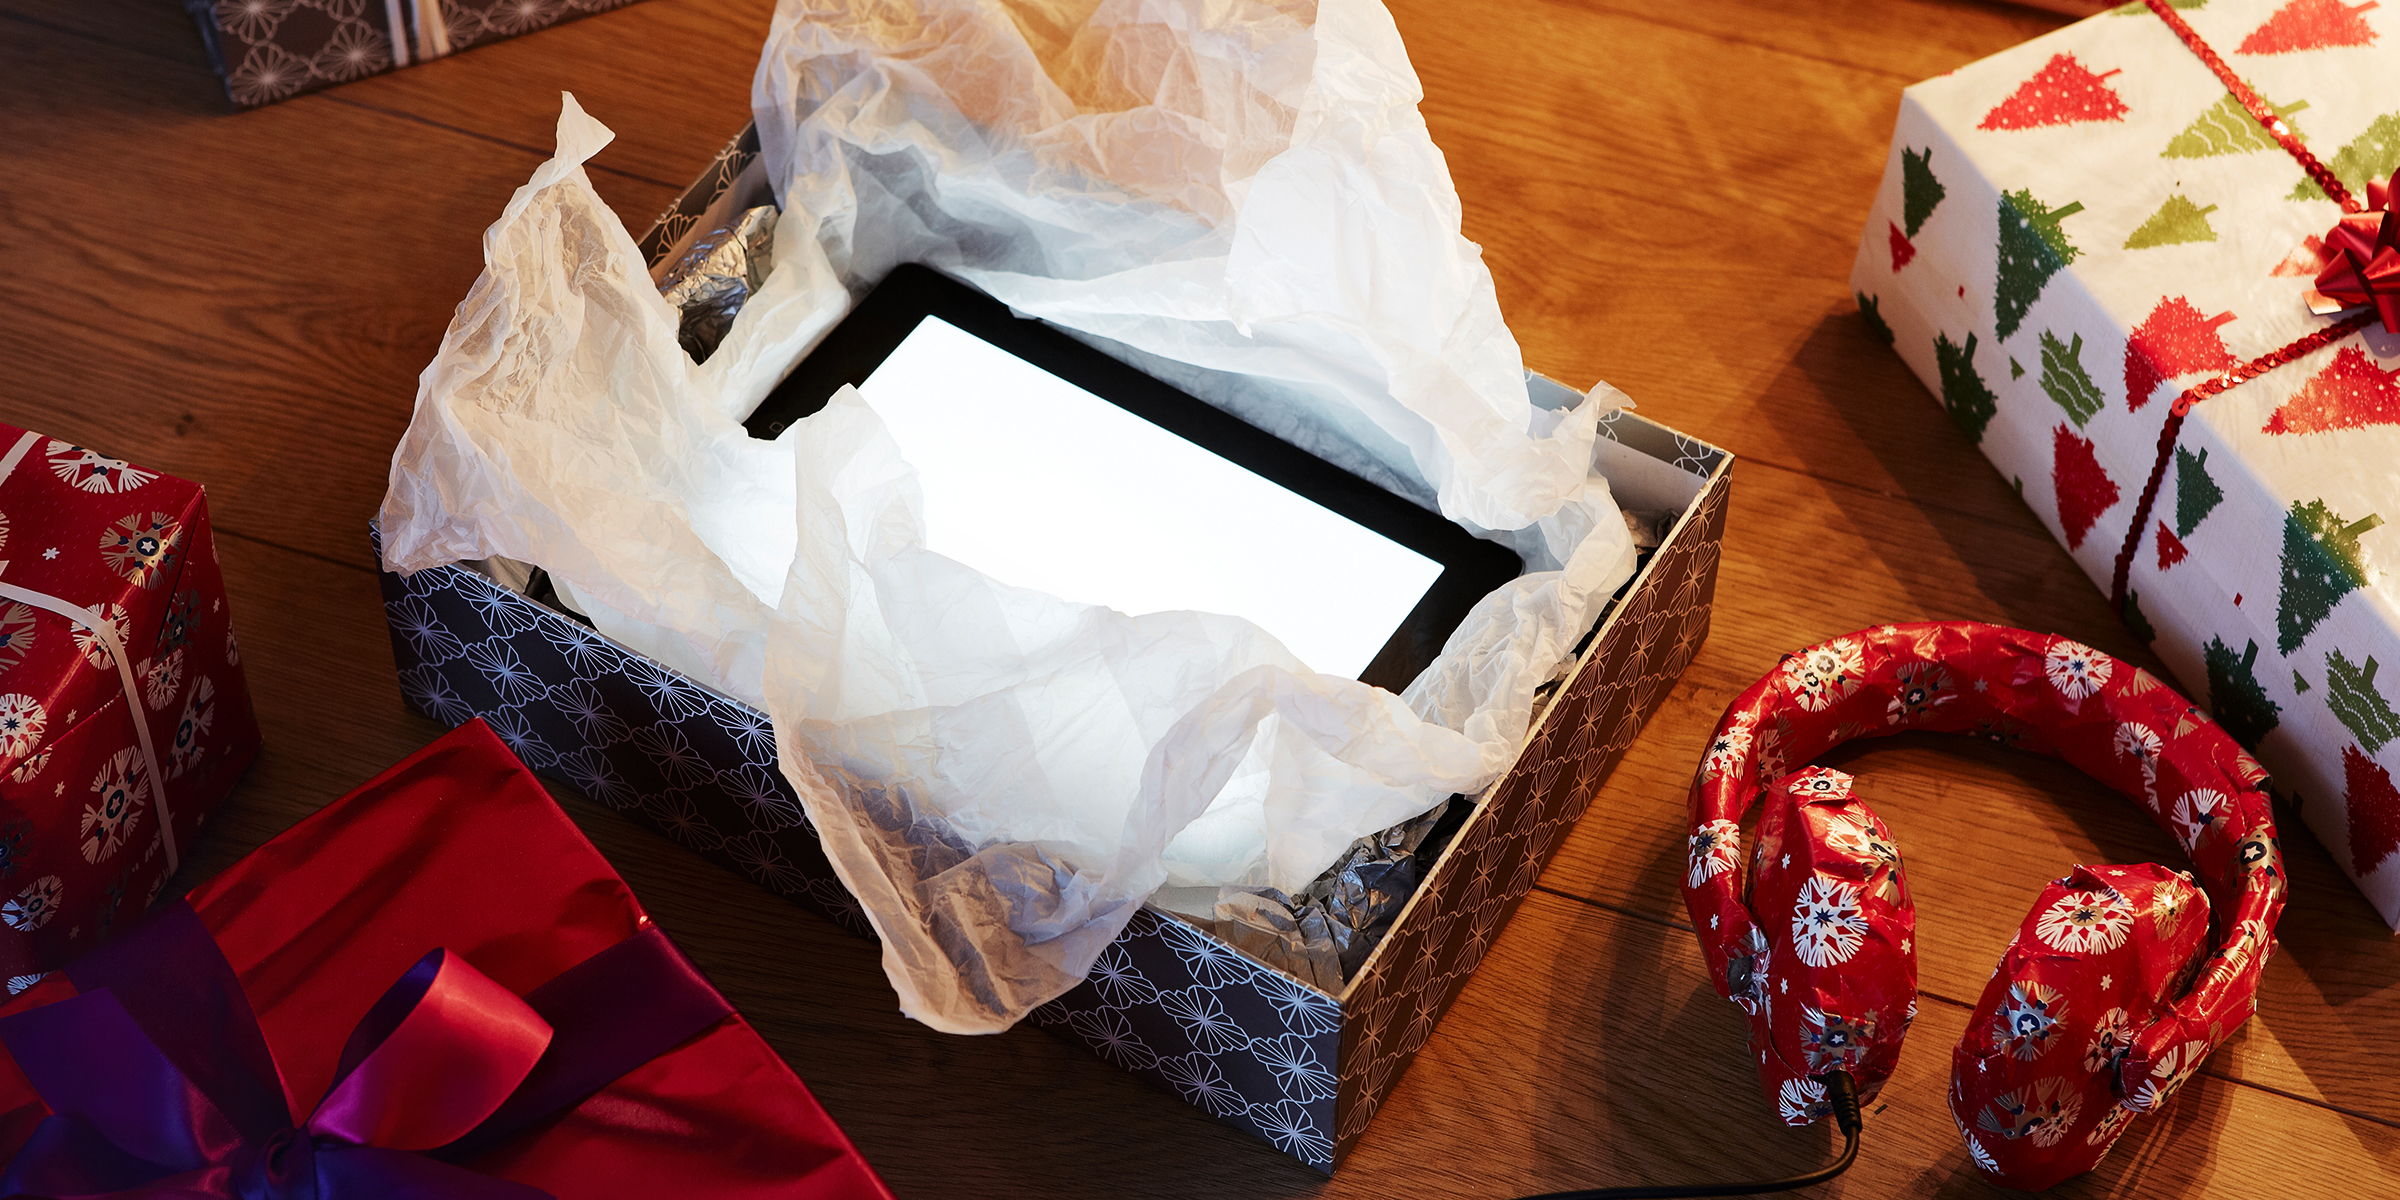 An opened present | Source: Getty Images